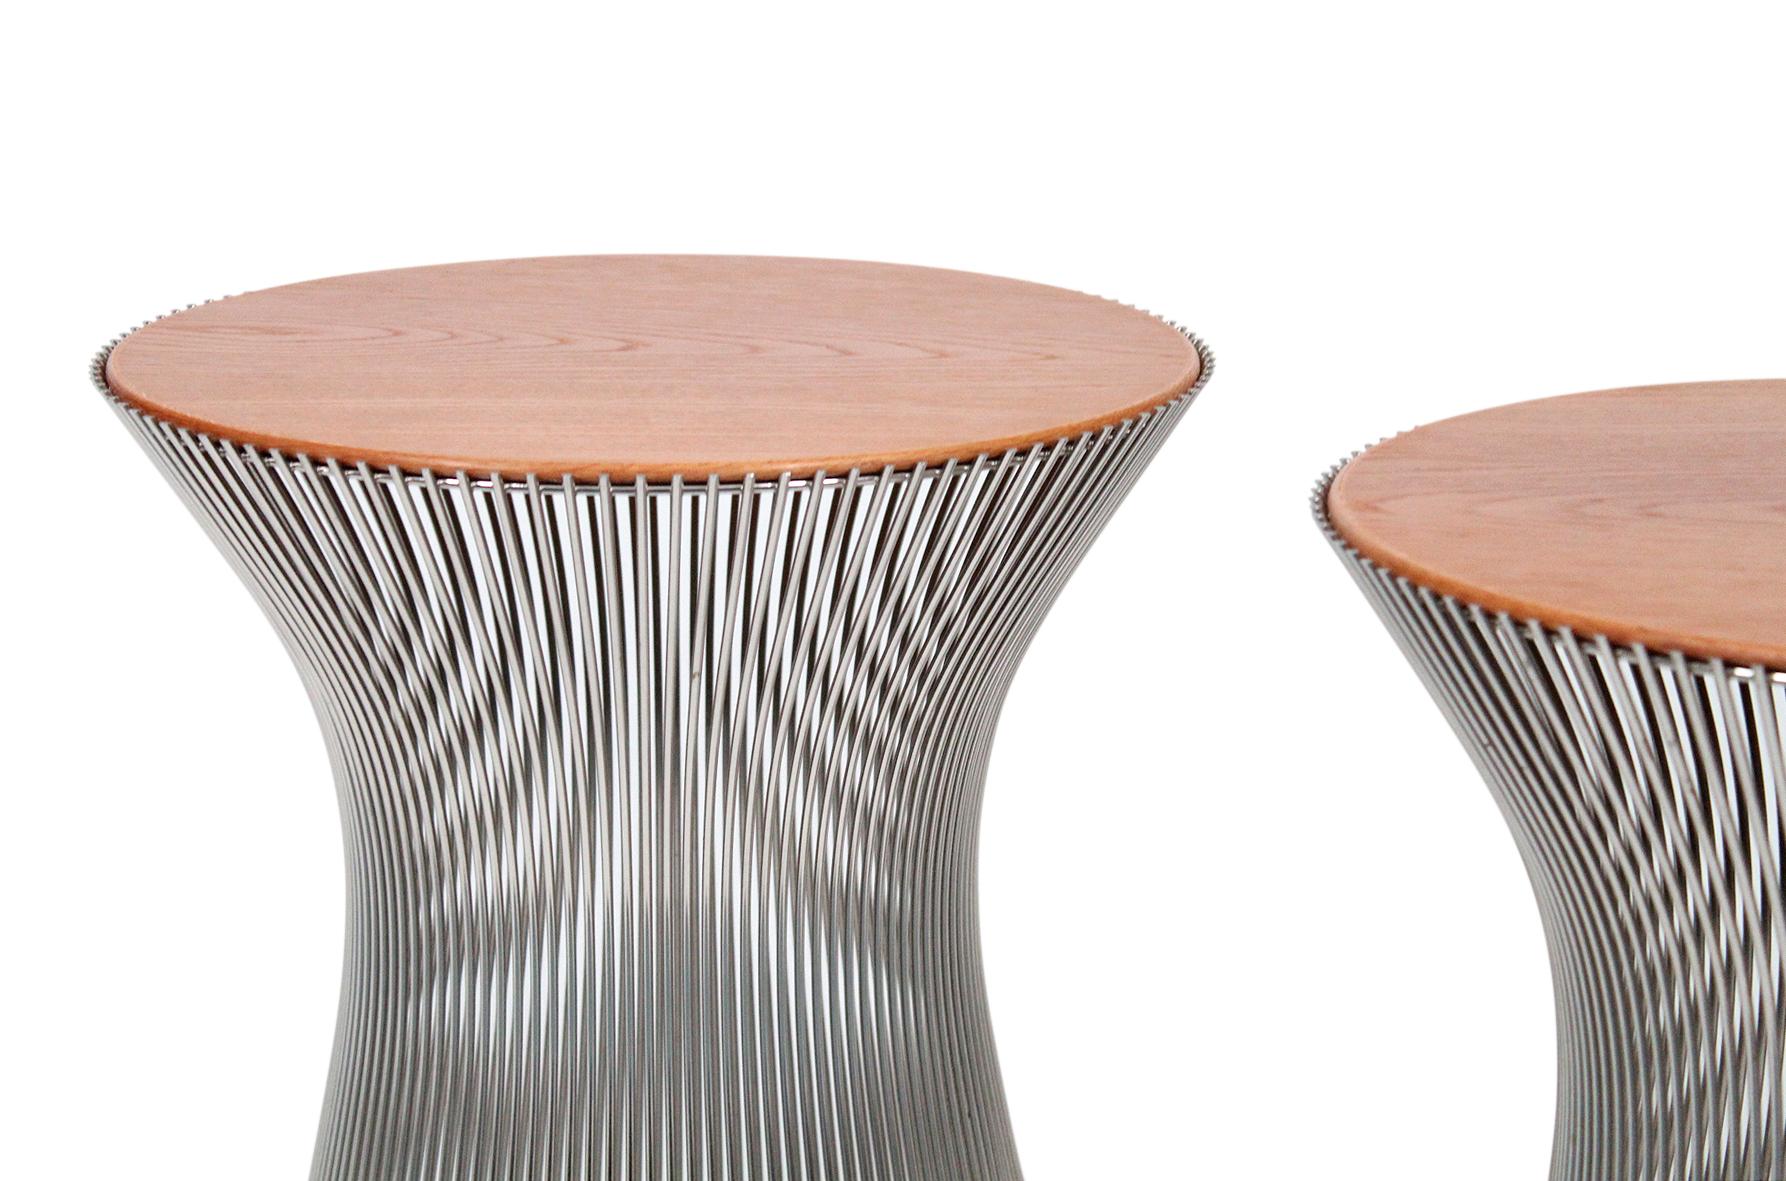 Late 20th Century Pair of Side Tables by Warren Platner for Knoll